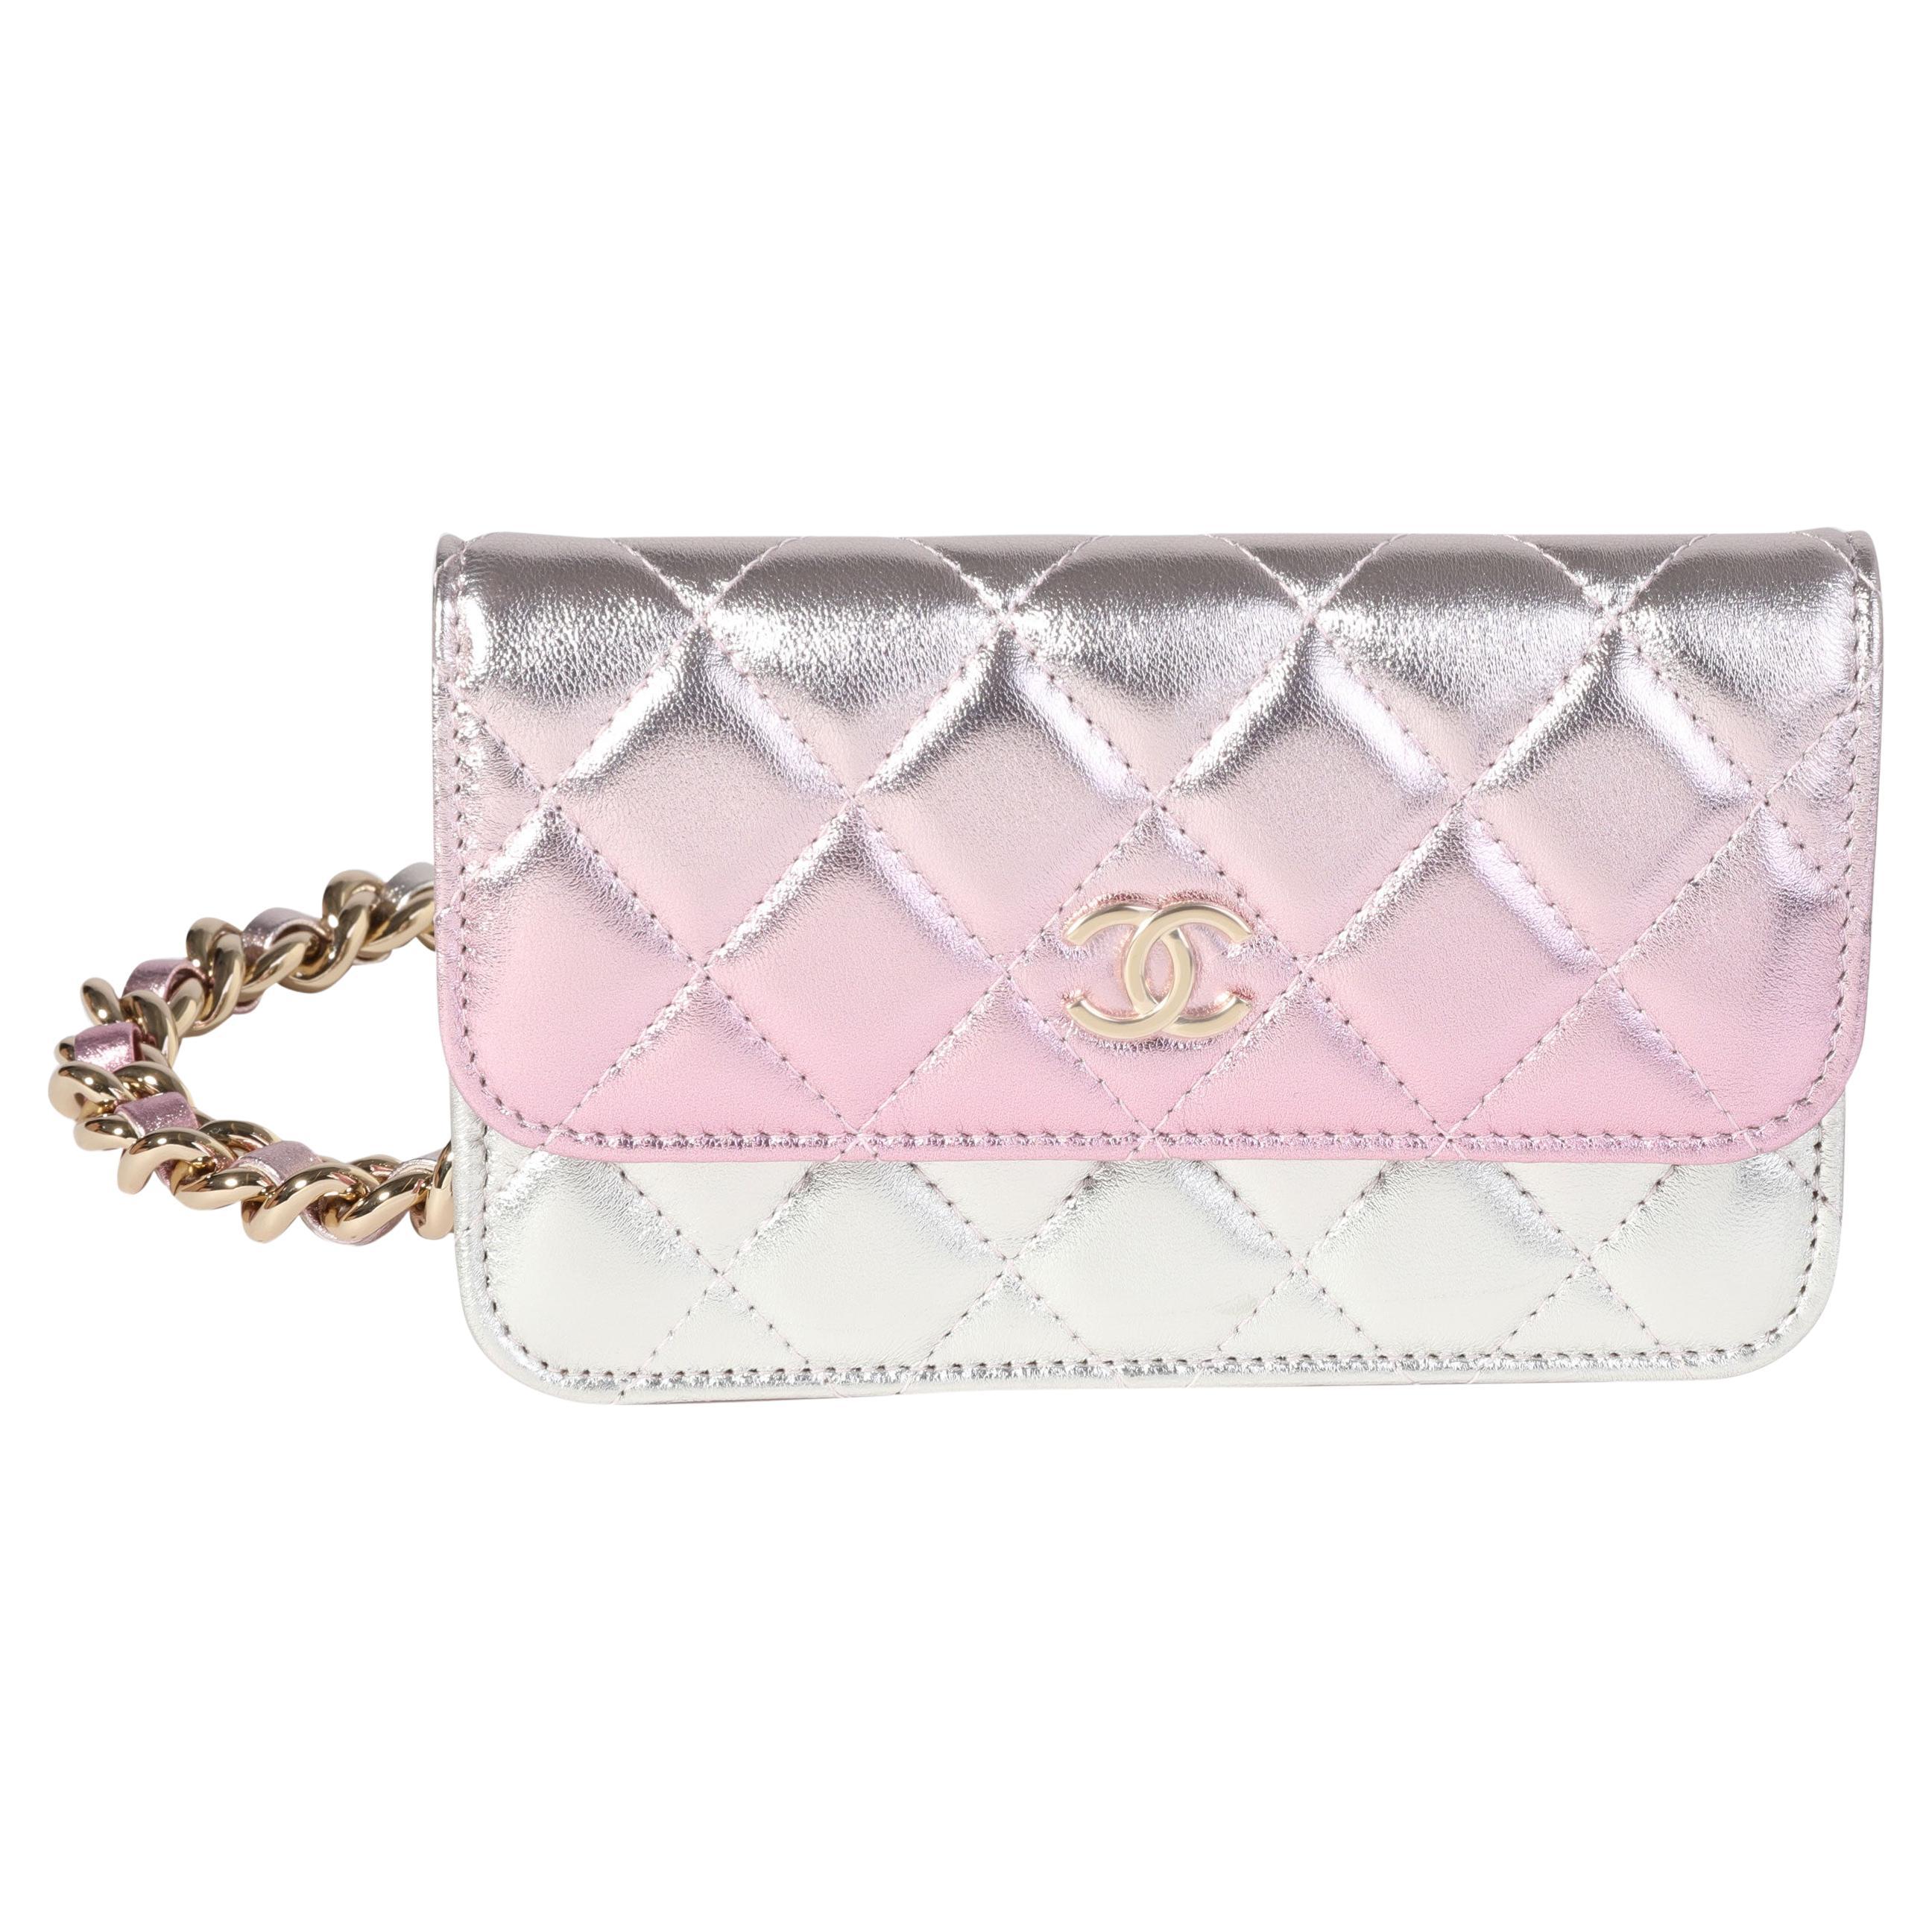 Chanel Iridescent Quilted Lambskin Coco Punk Flap Clutch with Chain